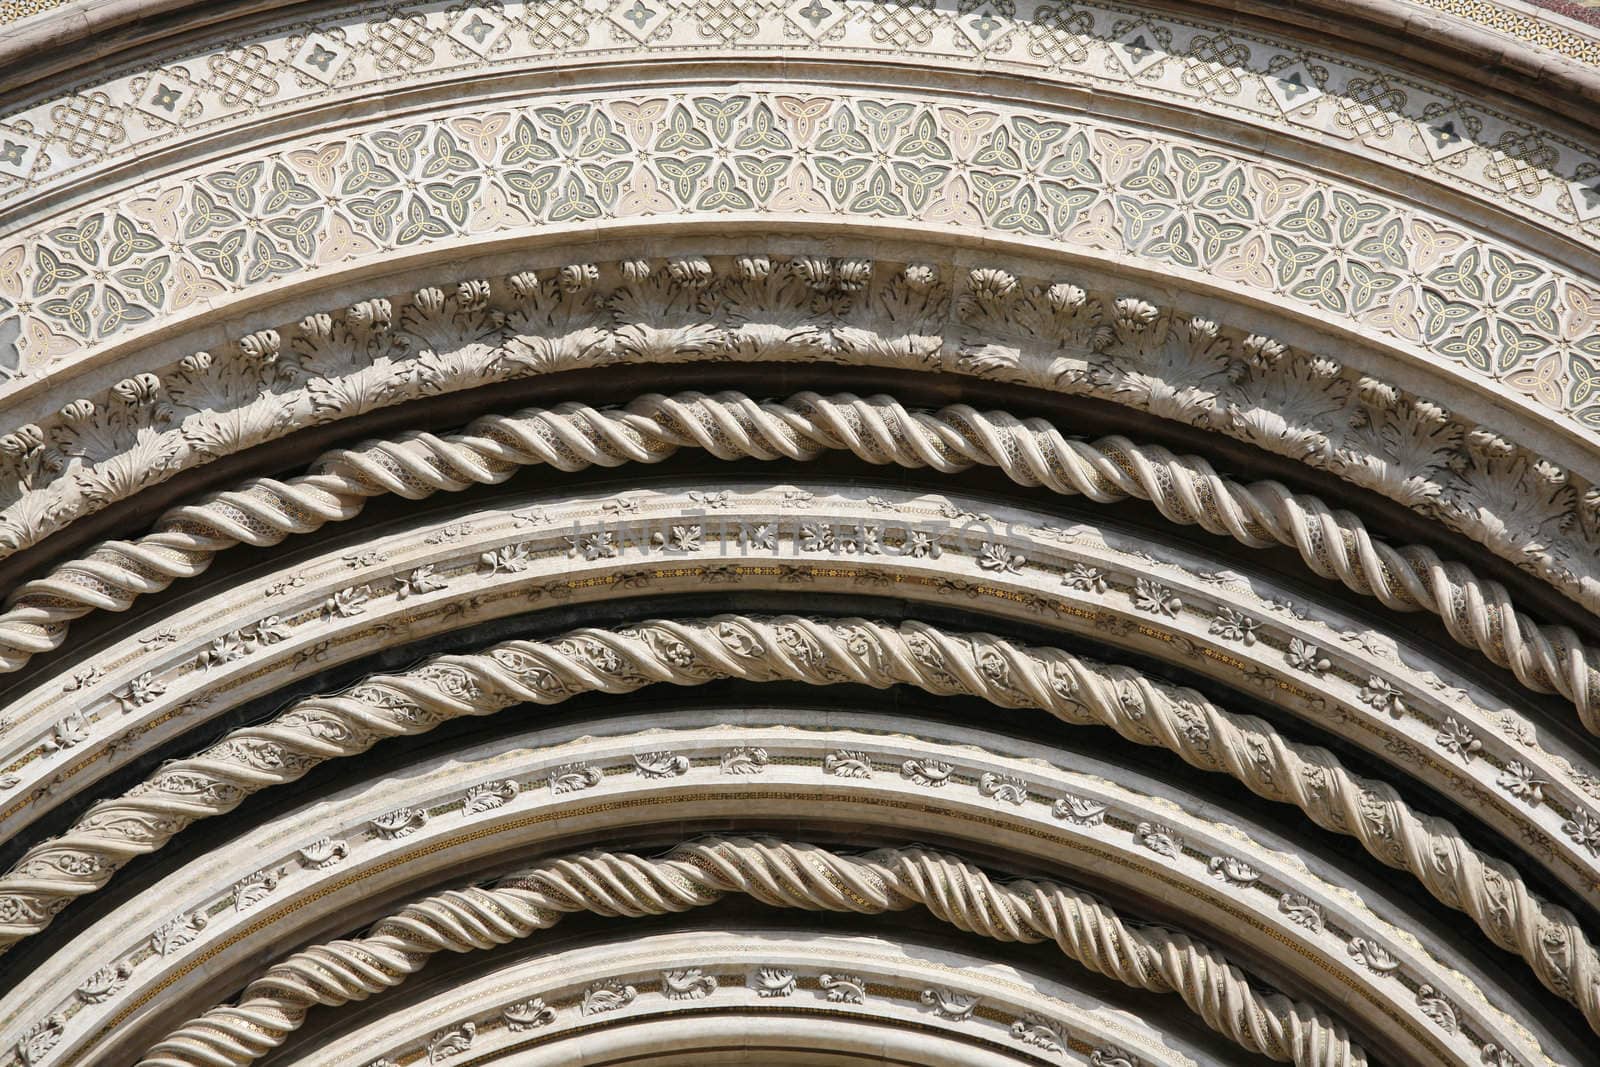 Detail of the facade of Orvieto Cathedral. (1290 - 1600 a. c.) Richly decorated with lots of stone mosaics and reliefs as well as pattern and artistic coils all over the facade.